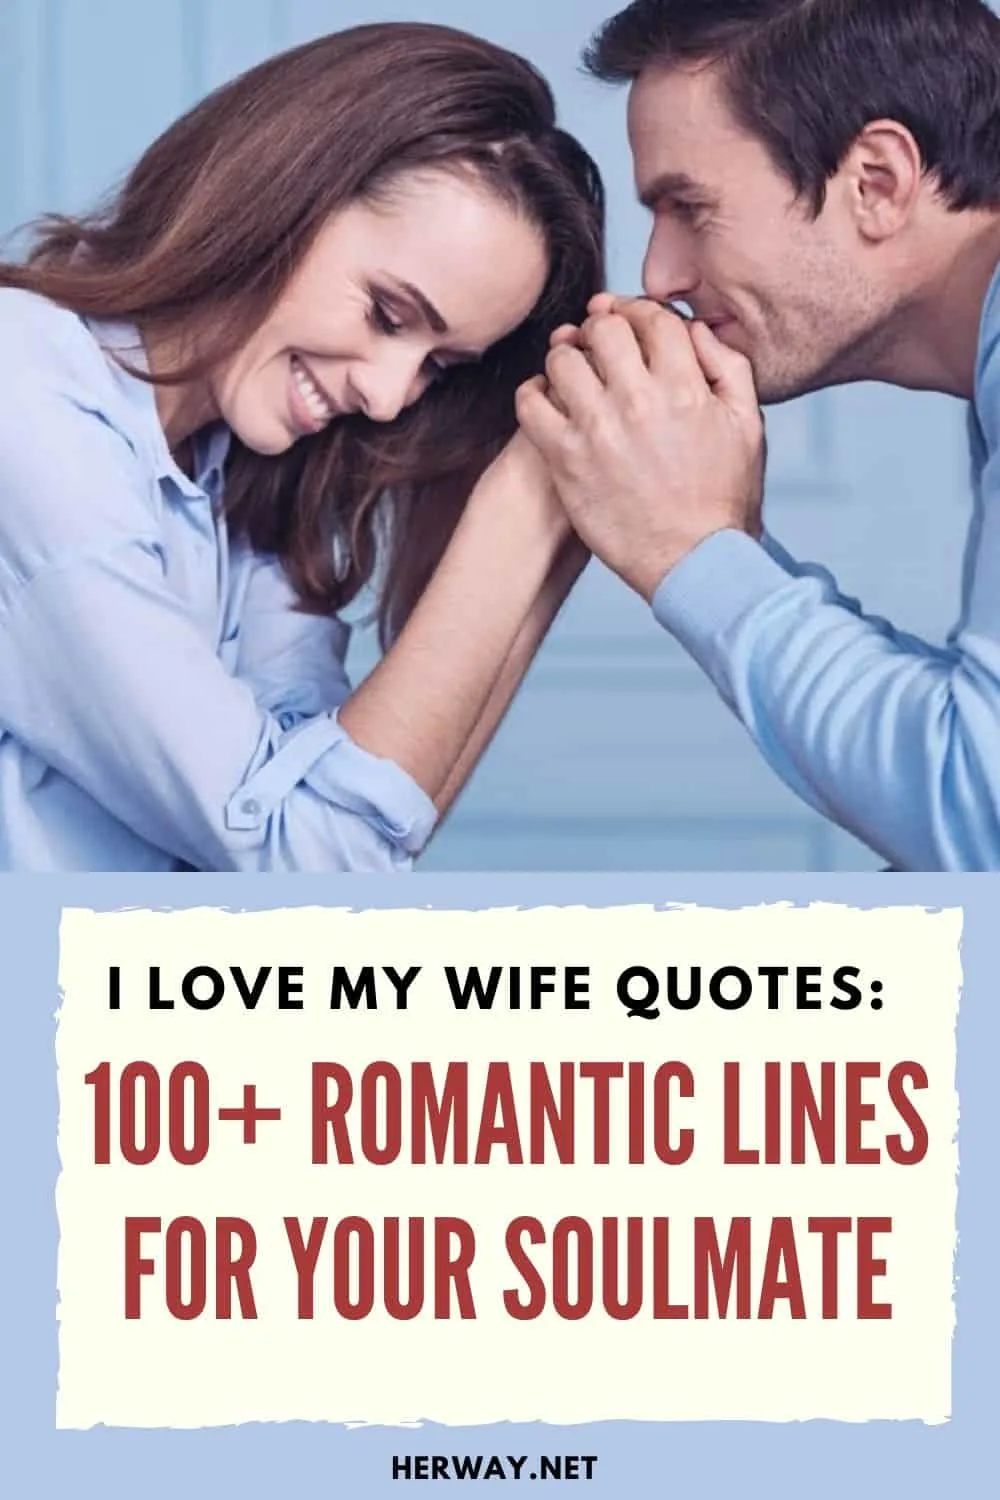 I Love My Wife Quotes: 100+ Romantic Lines For Your Soulmate pinterest